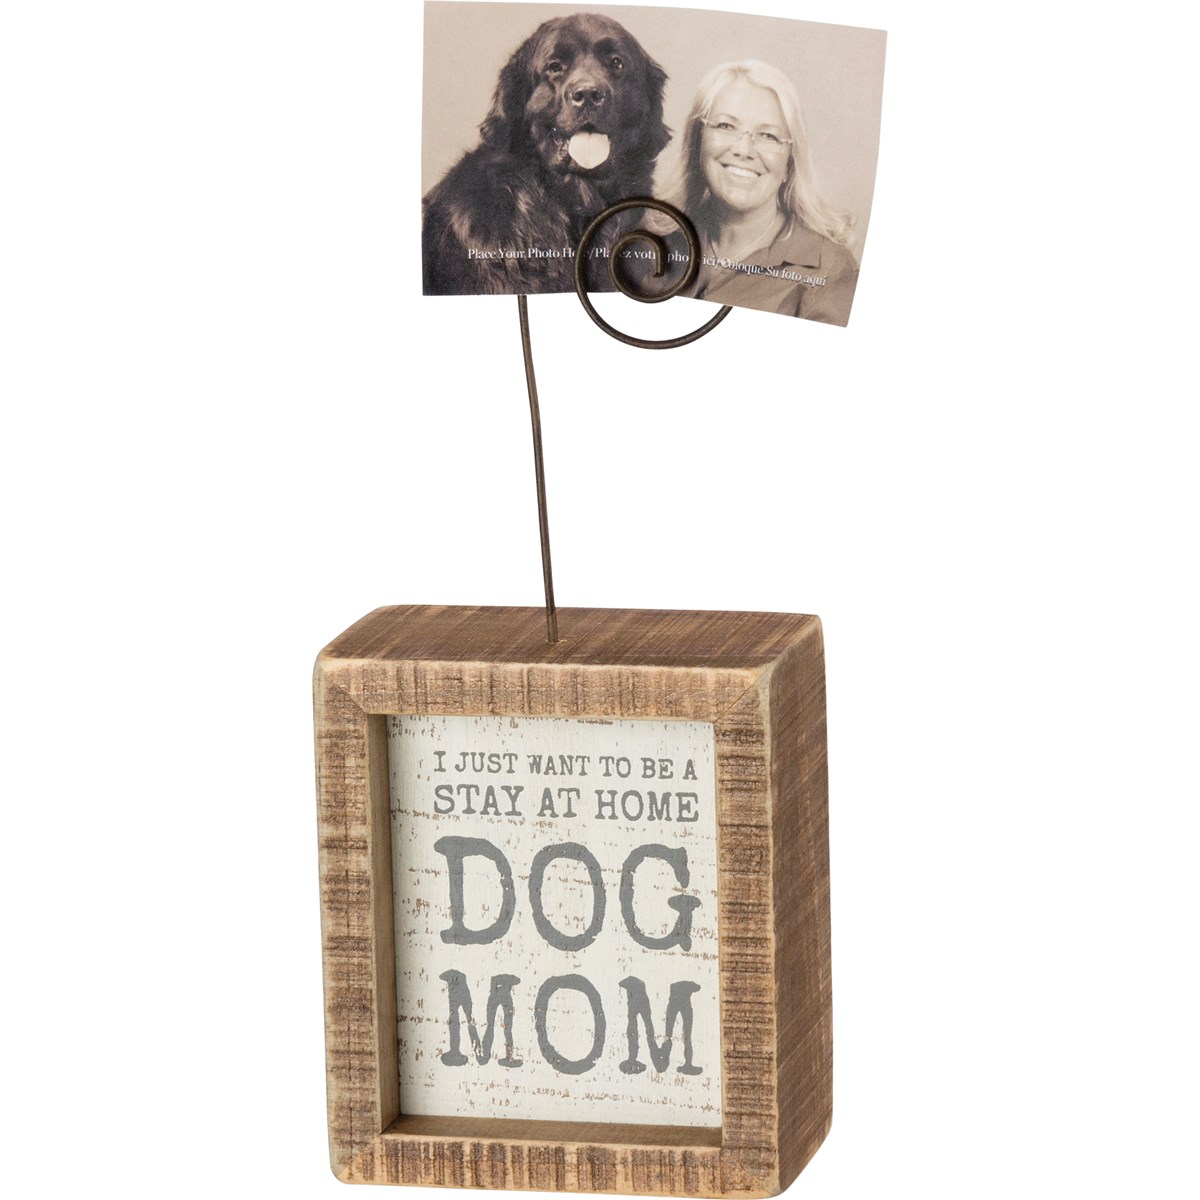 Inset Photo Block - Be A Stay At Home Dog Mom - 3" x 3.50" x 1.50", Plus Wire - Wood, Wire